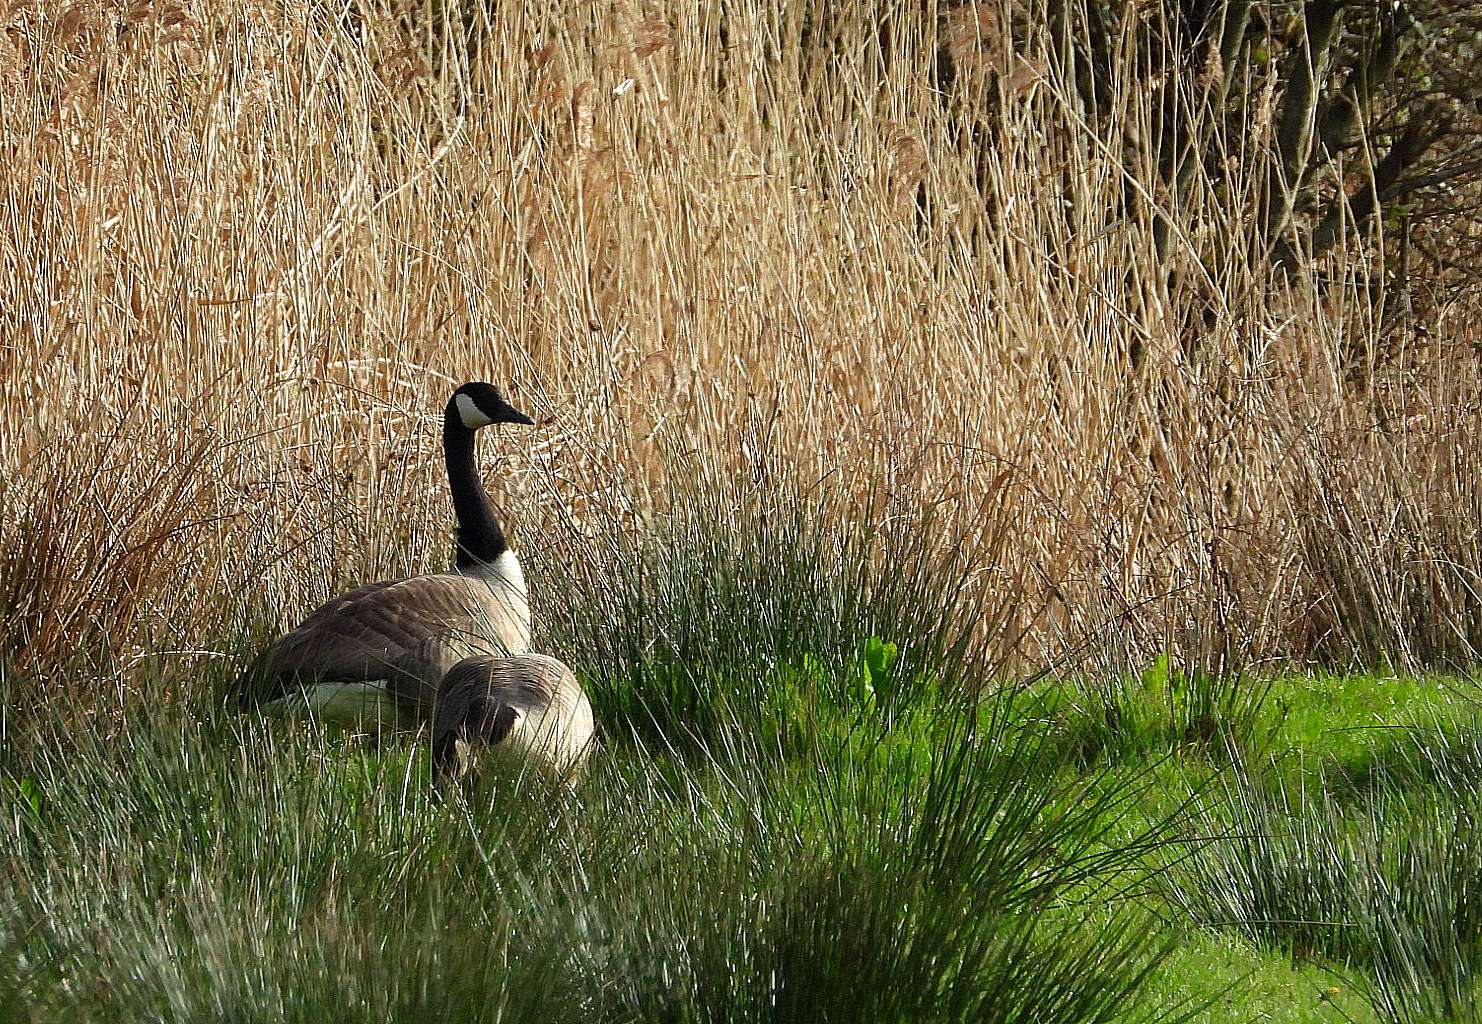 Canada Goose by Kenneth Bradley at Exminster marshes RSPB